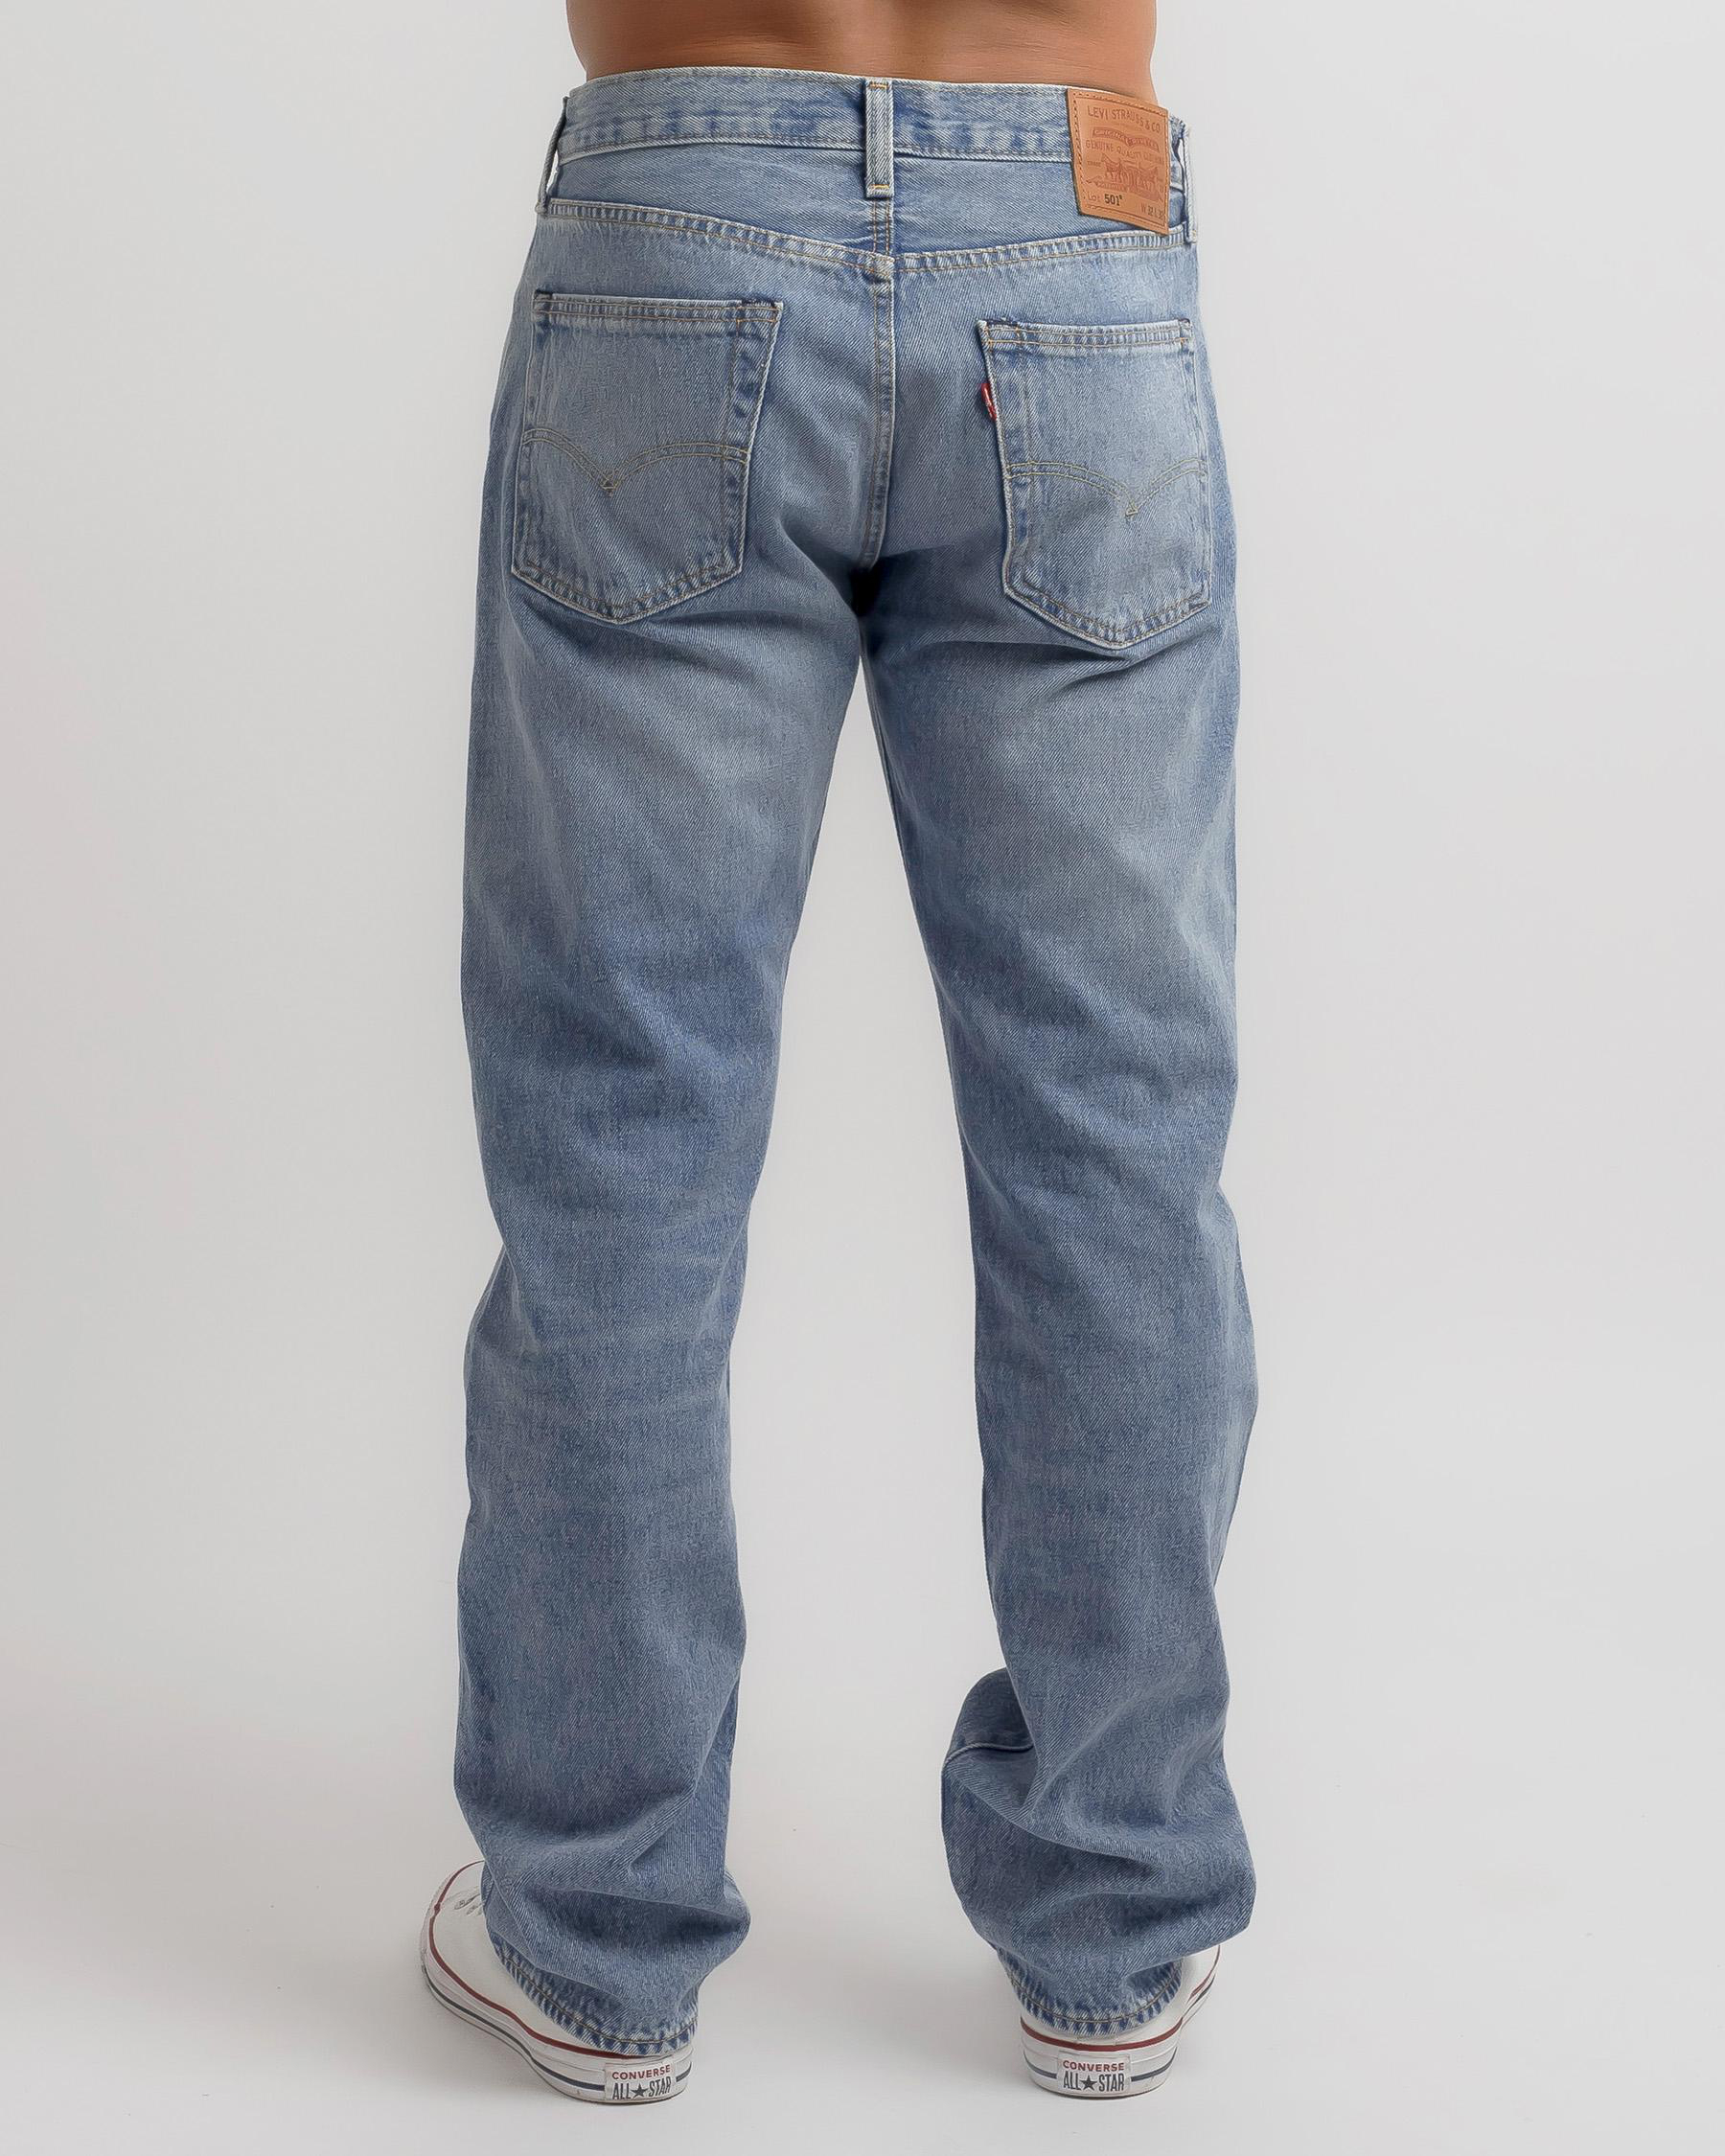 Levi's 501 Original Jeans In Glassy Waves - Fast Shipping & Easy ...